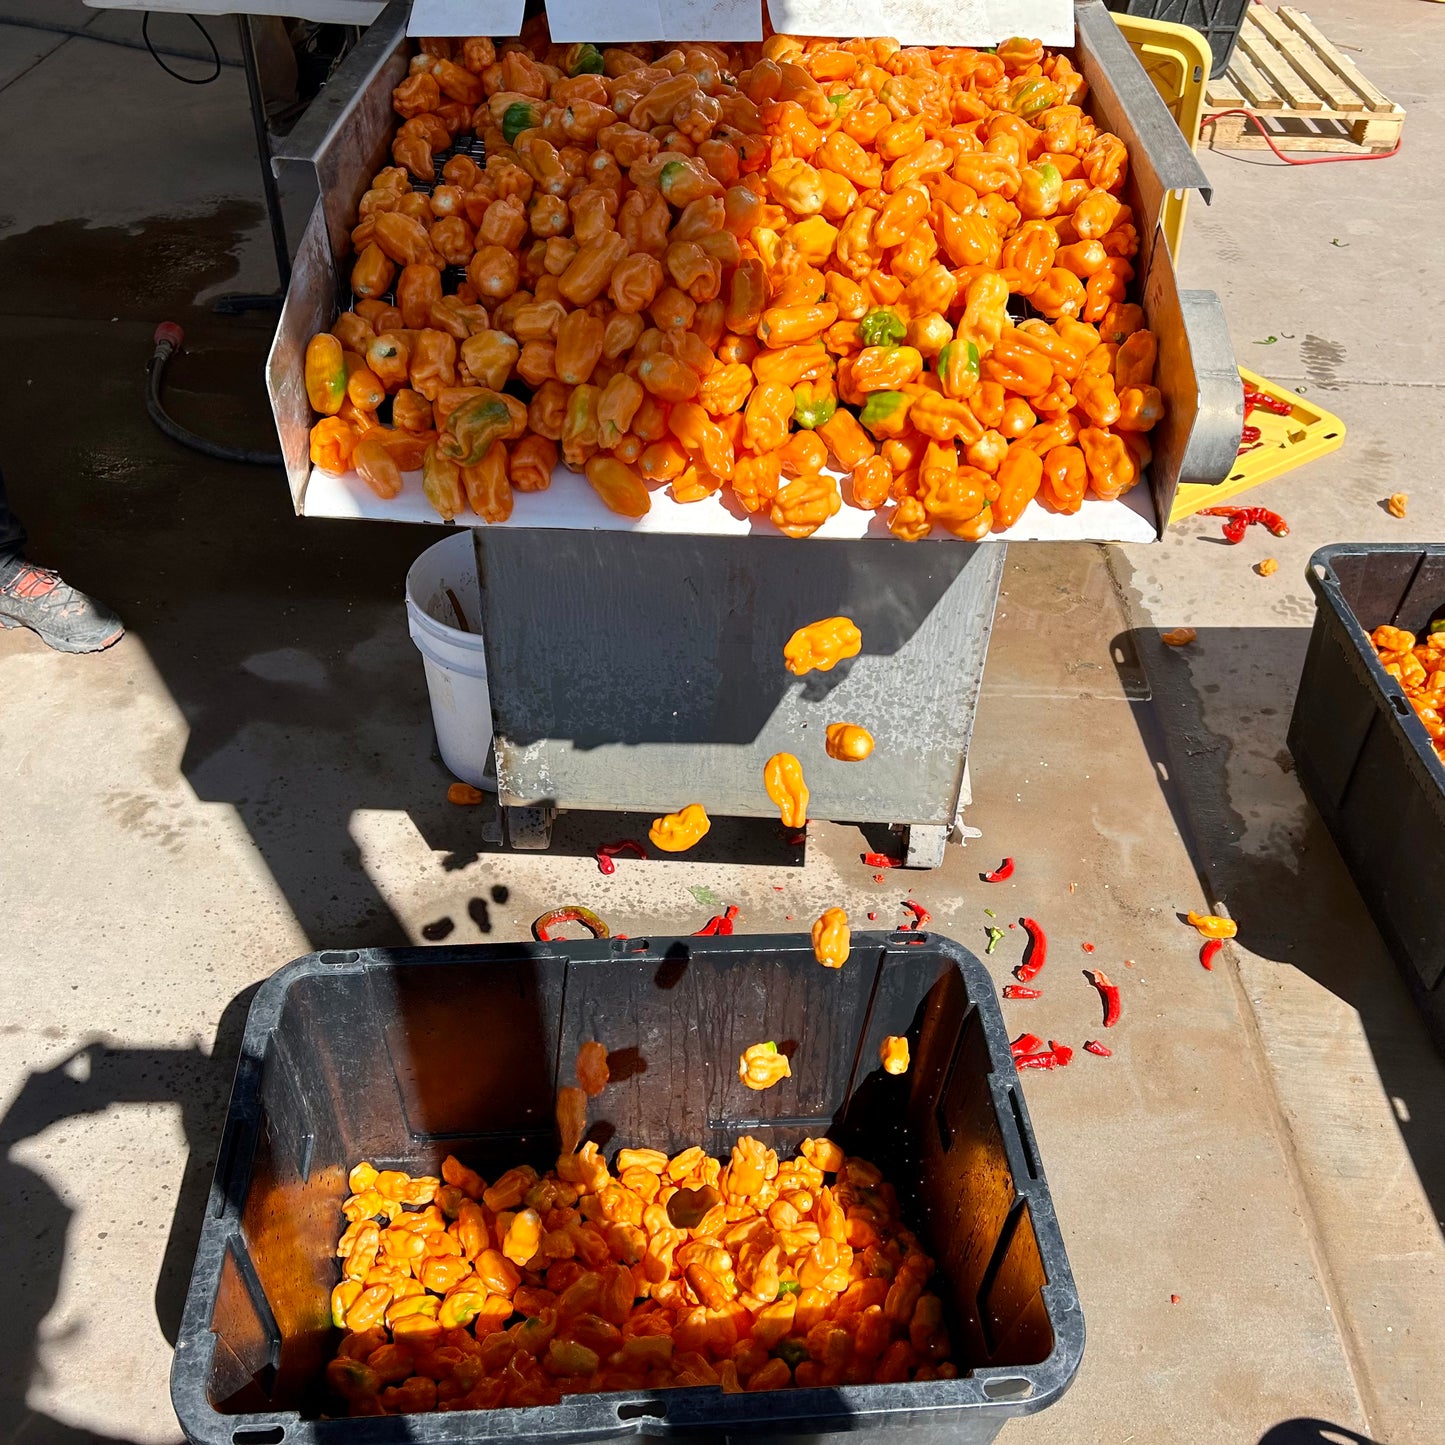 Habanero peppers being prepared for hot sauce production at Silver Leaf Farms